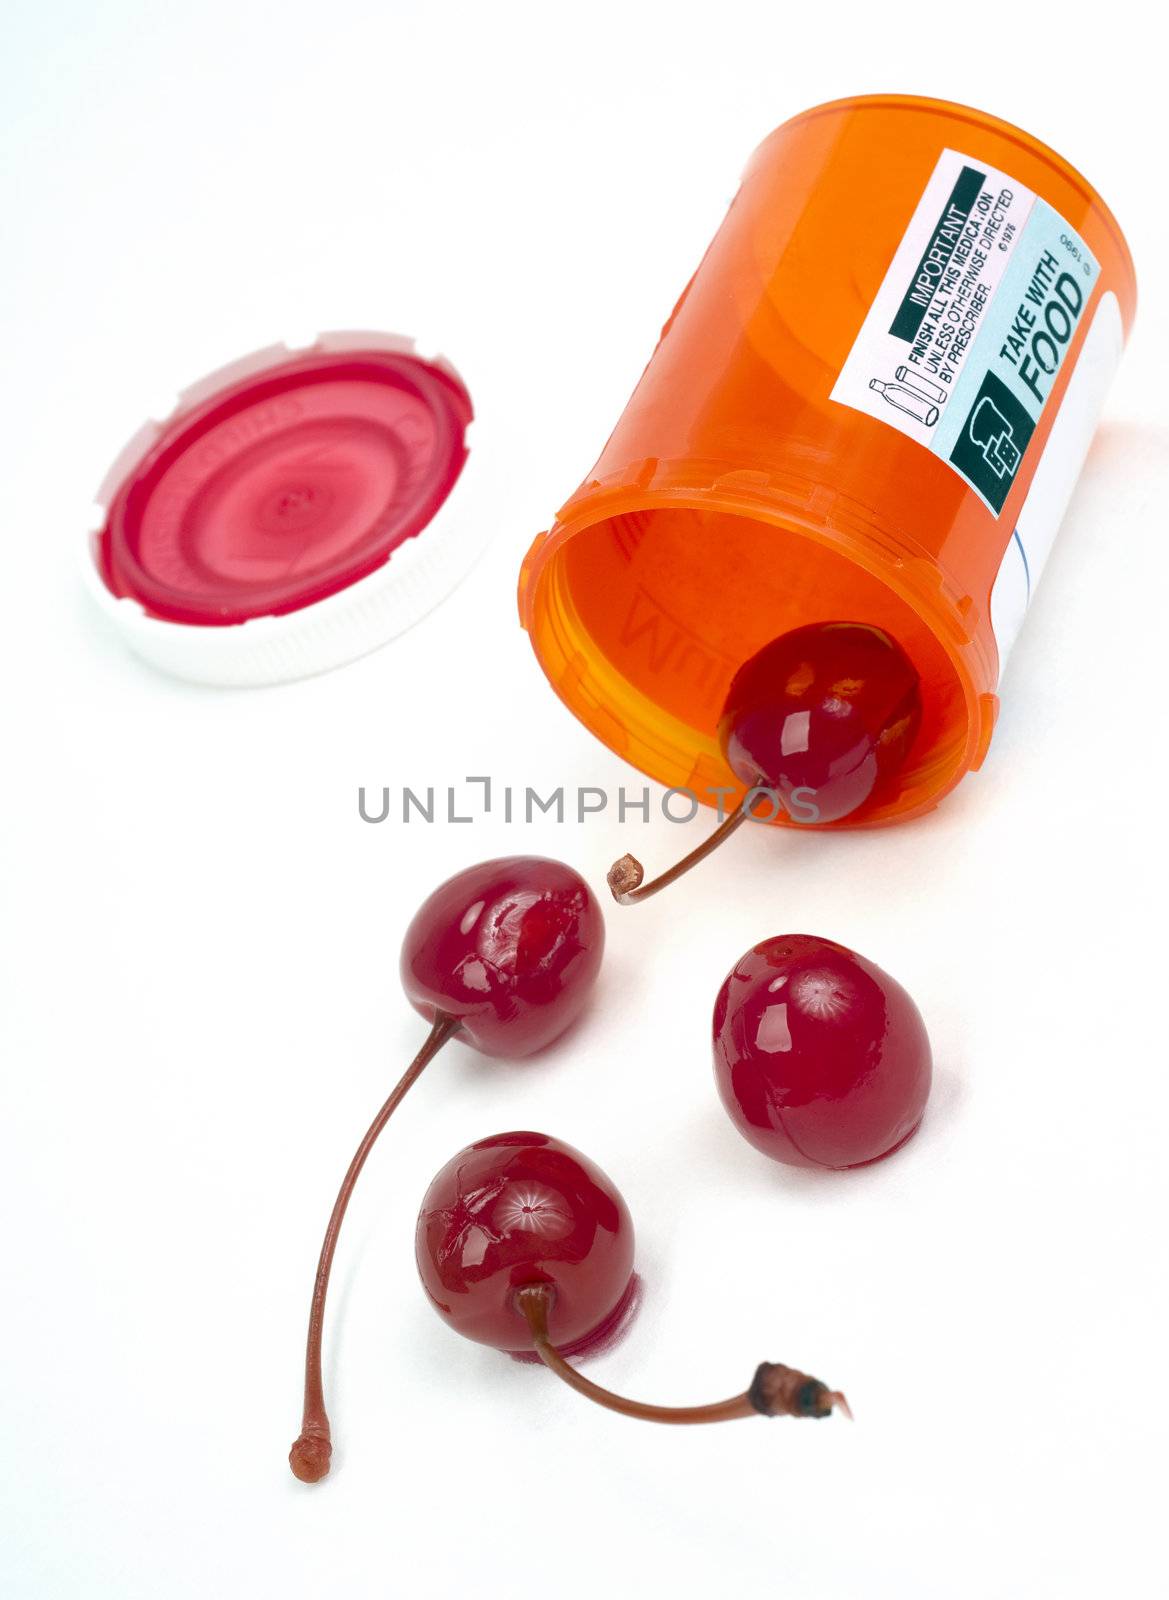 Food Cherries Roll out of Pharmacy Medicine Container by ChrisBoswell